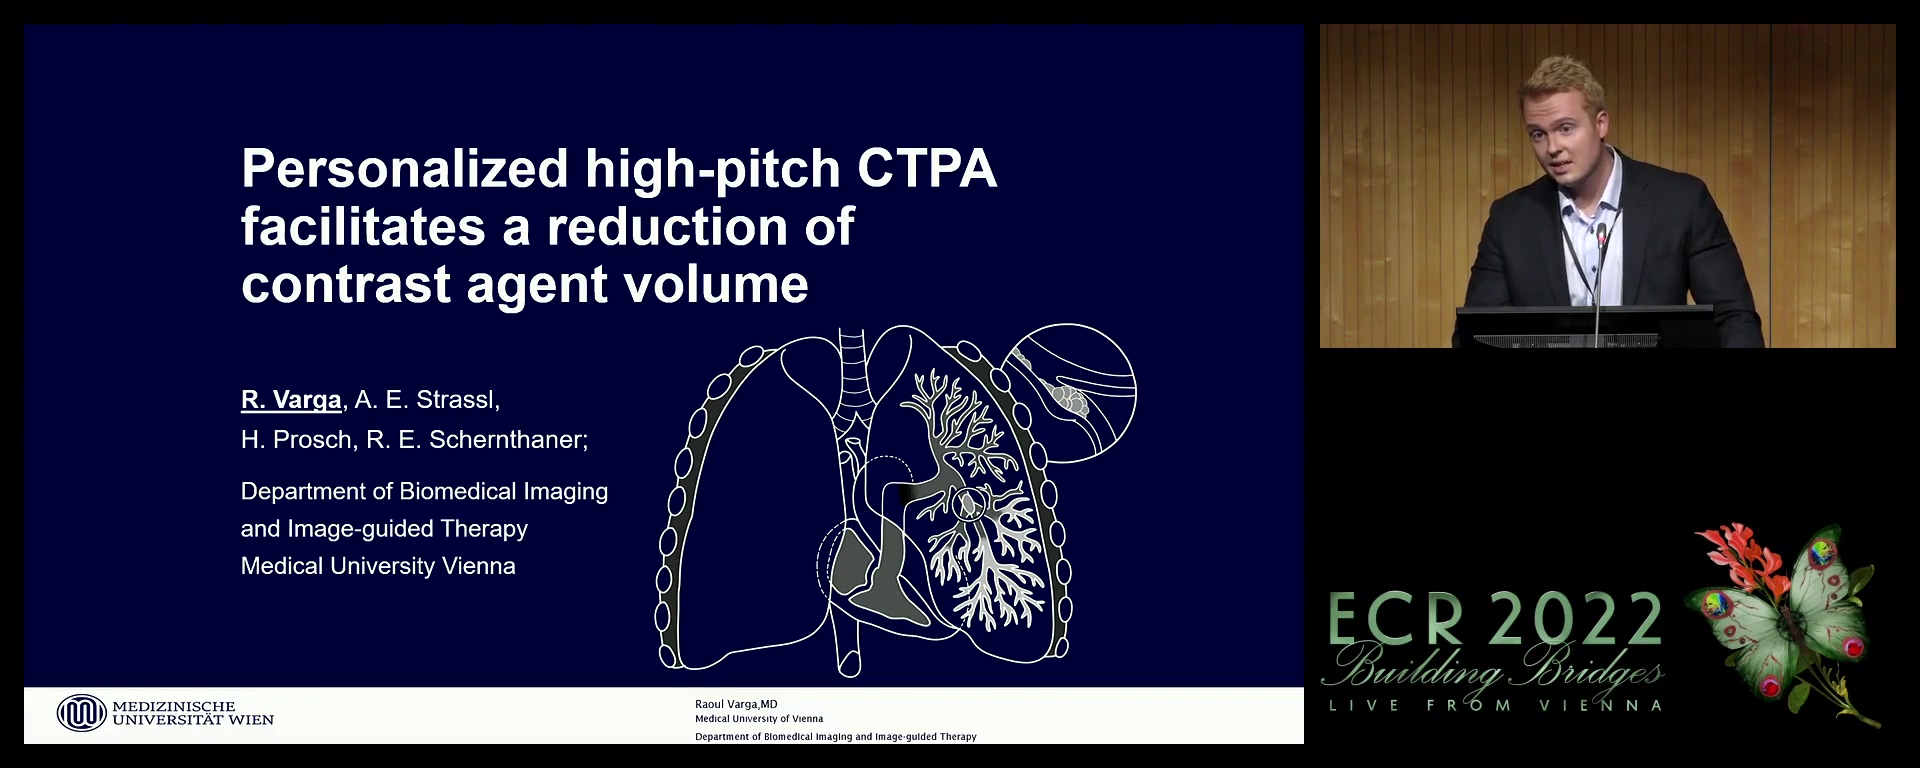 Personalised high-pitch CTPA facilitates a reduction of contrast agent volume - Raoul Varga, Wien / AT